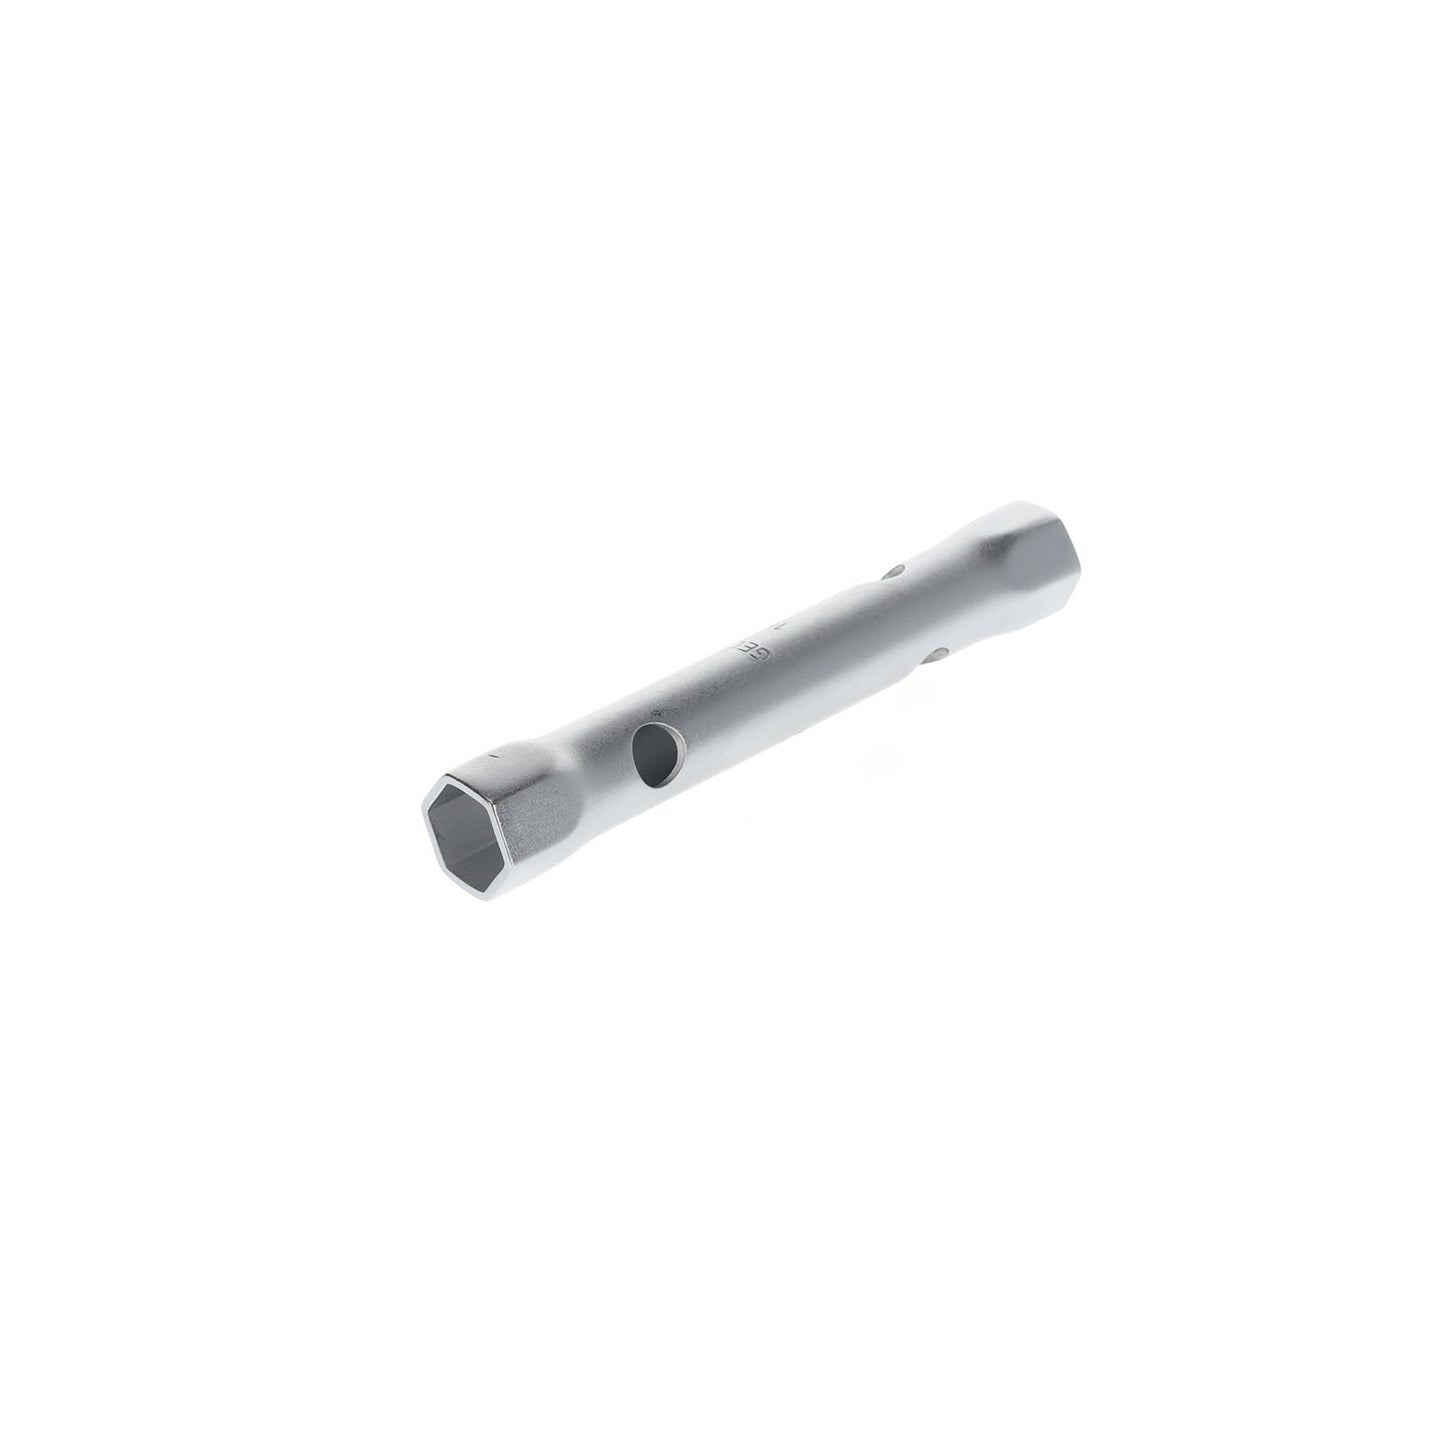 GEDORE 26 R 18X19 - Hollow Socket Wrench, 18x19 (6211960)